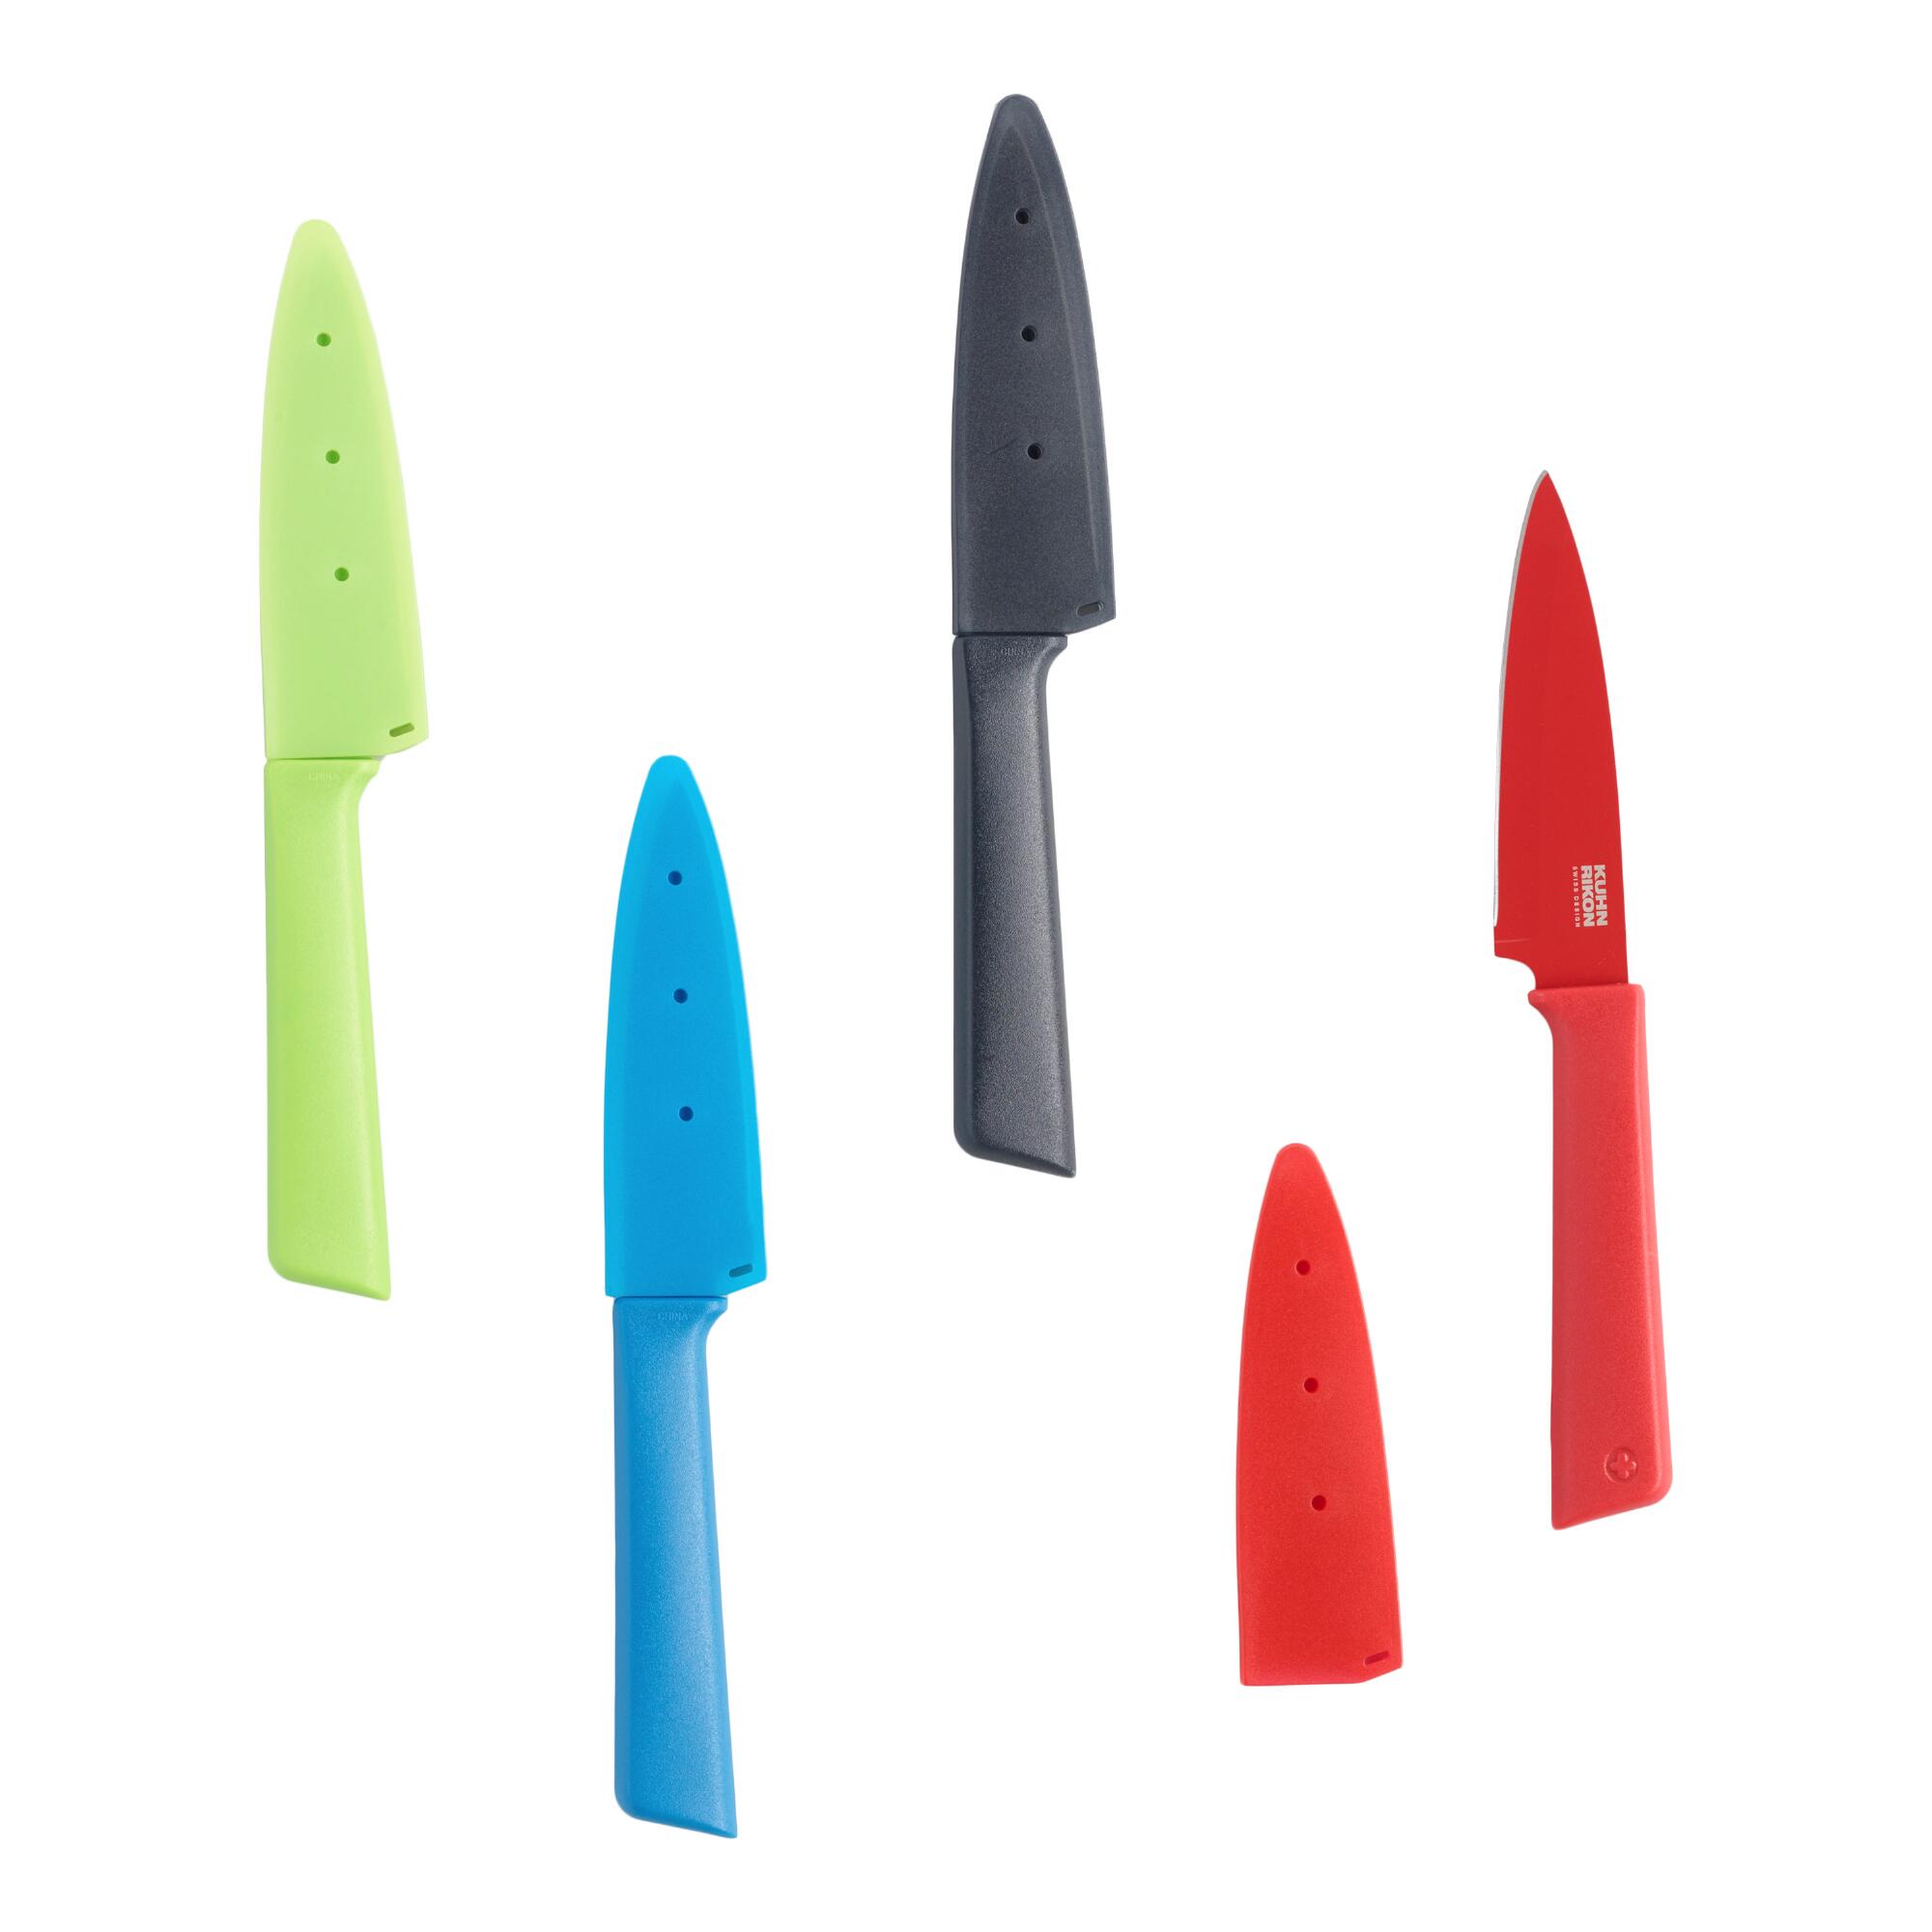 Kuhn Rikon Colori 4 Inch Carbon Steel Paring Knives Set of 4 by World Market